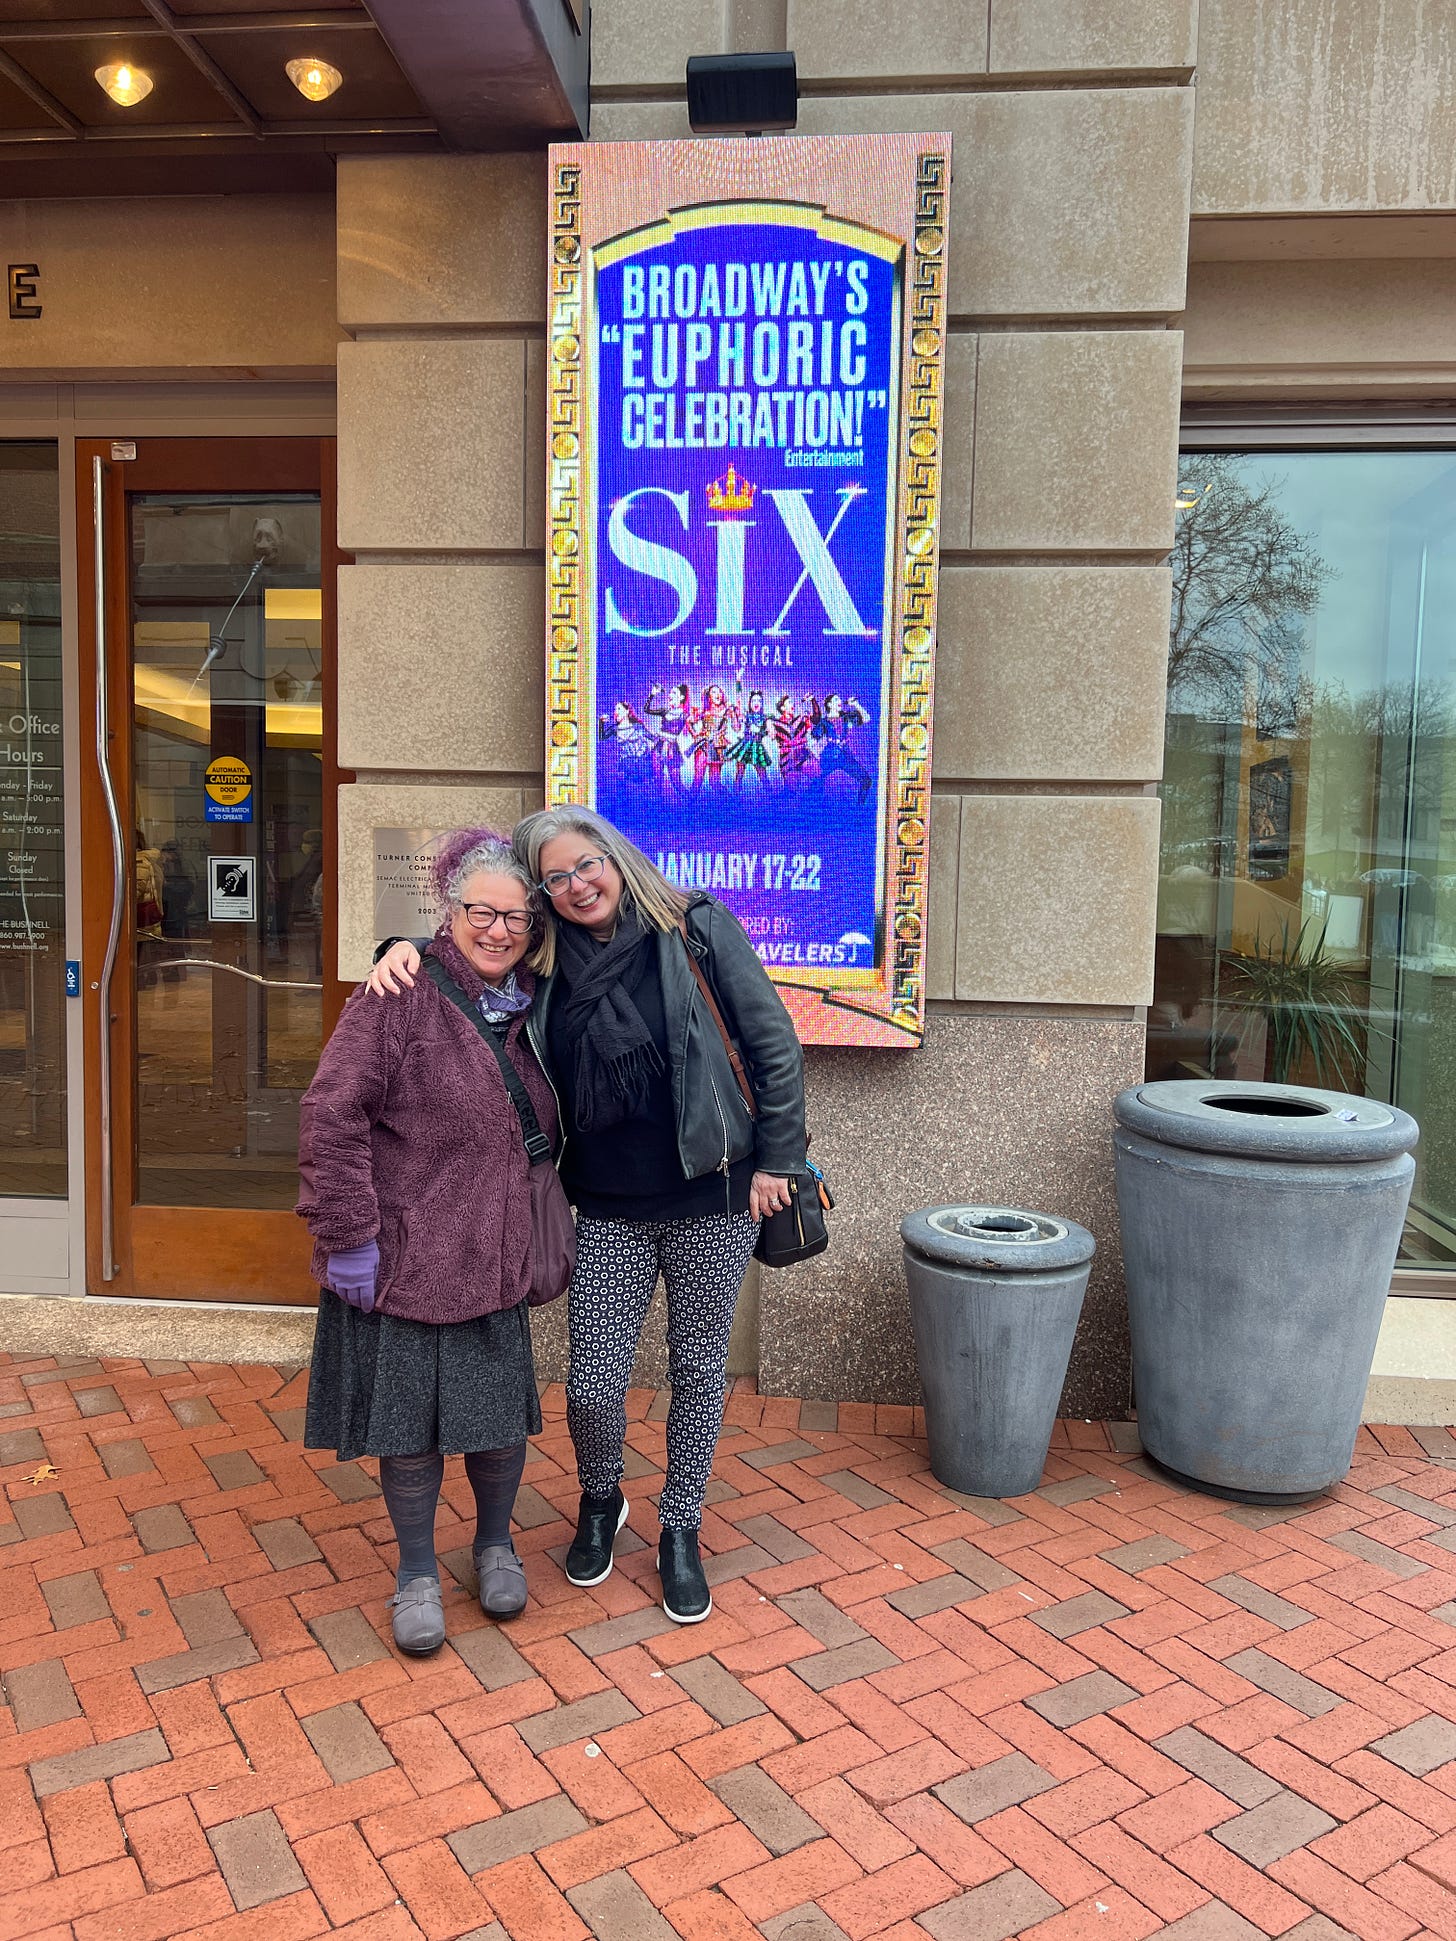 Sarah and Sara outside the Bushnell theater with Six the Musical invite in background